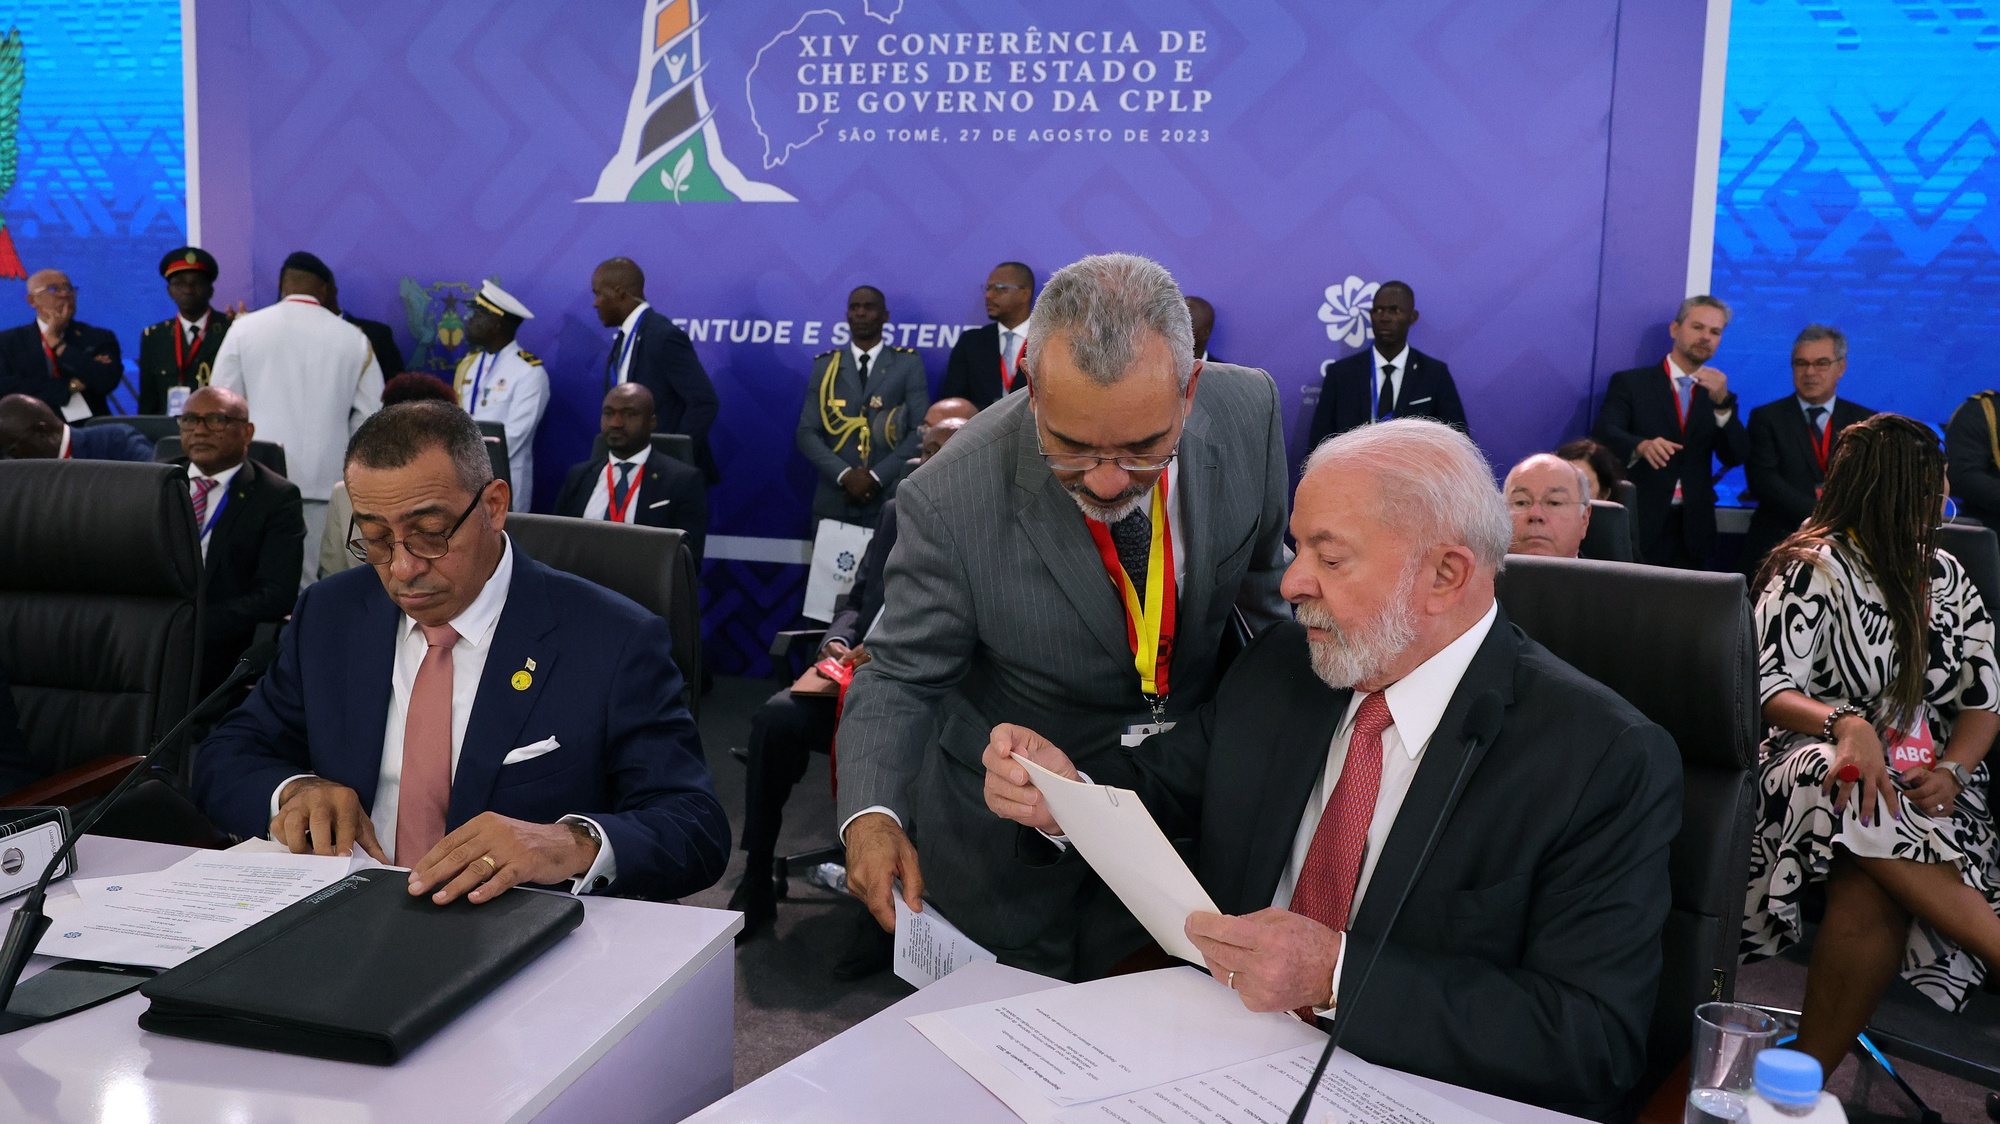 Brazilian President Inacio Lula da Silva (R) and President of the Republic of São Tomé and Príncipe, Carlos Vila Nova (L), during the XIV CPLP Conference in Sao Tome and Principe, 27th August 2023. The CPLP, which includes Angola, Brazil, Cape Verde, Guinea-Bissau, Equatorial Guinea, Mozambique, Portugal, São Tomé and Príncipe and Timor-Leste, holds the 14th Conference of Heads of State and Government, in São Tomé and Príncipe, under the motto &quot;Youth and Sustainability&quot;. ESTELA SILVA/LUSA